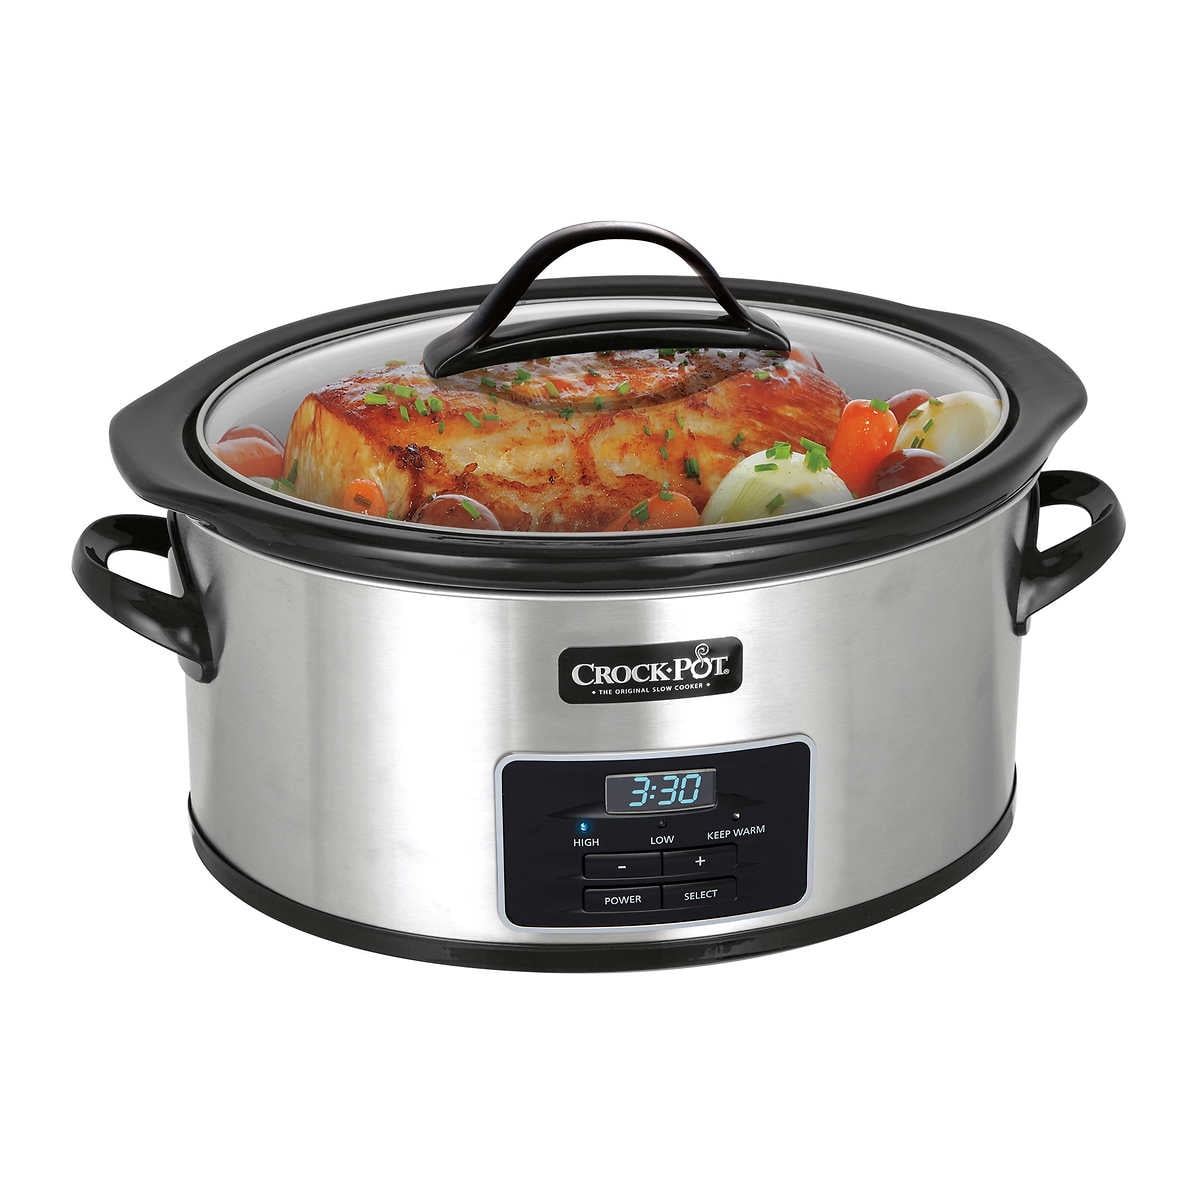  Crock-Pot 6-Quart Wifi-Enabled Slow Cooker Only $86.46 Shipped  (Regularly $149.99)